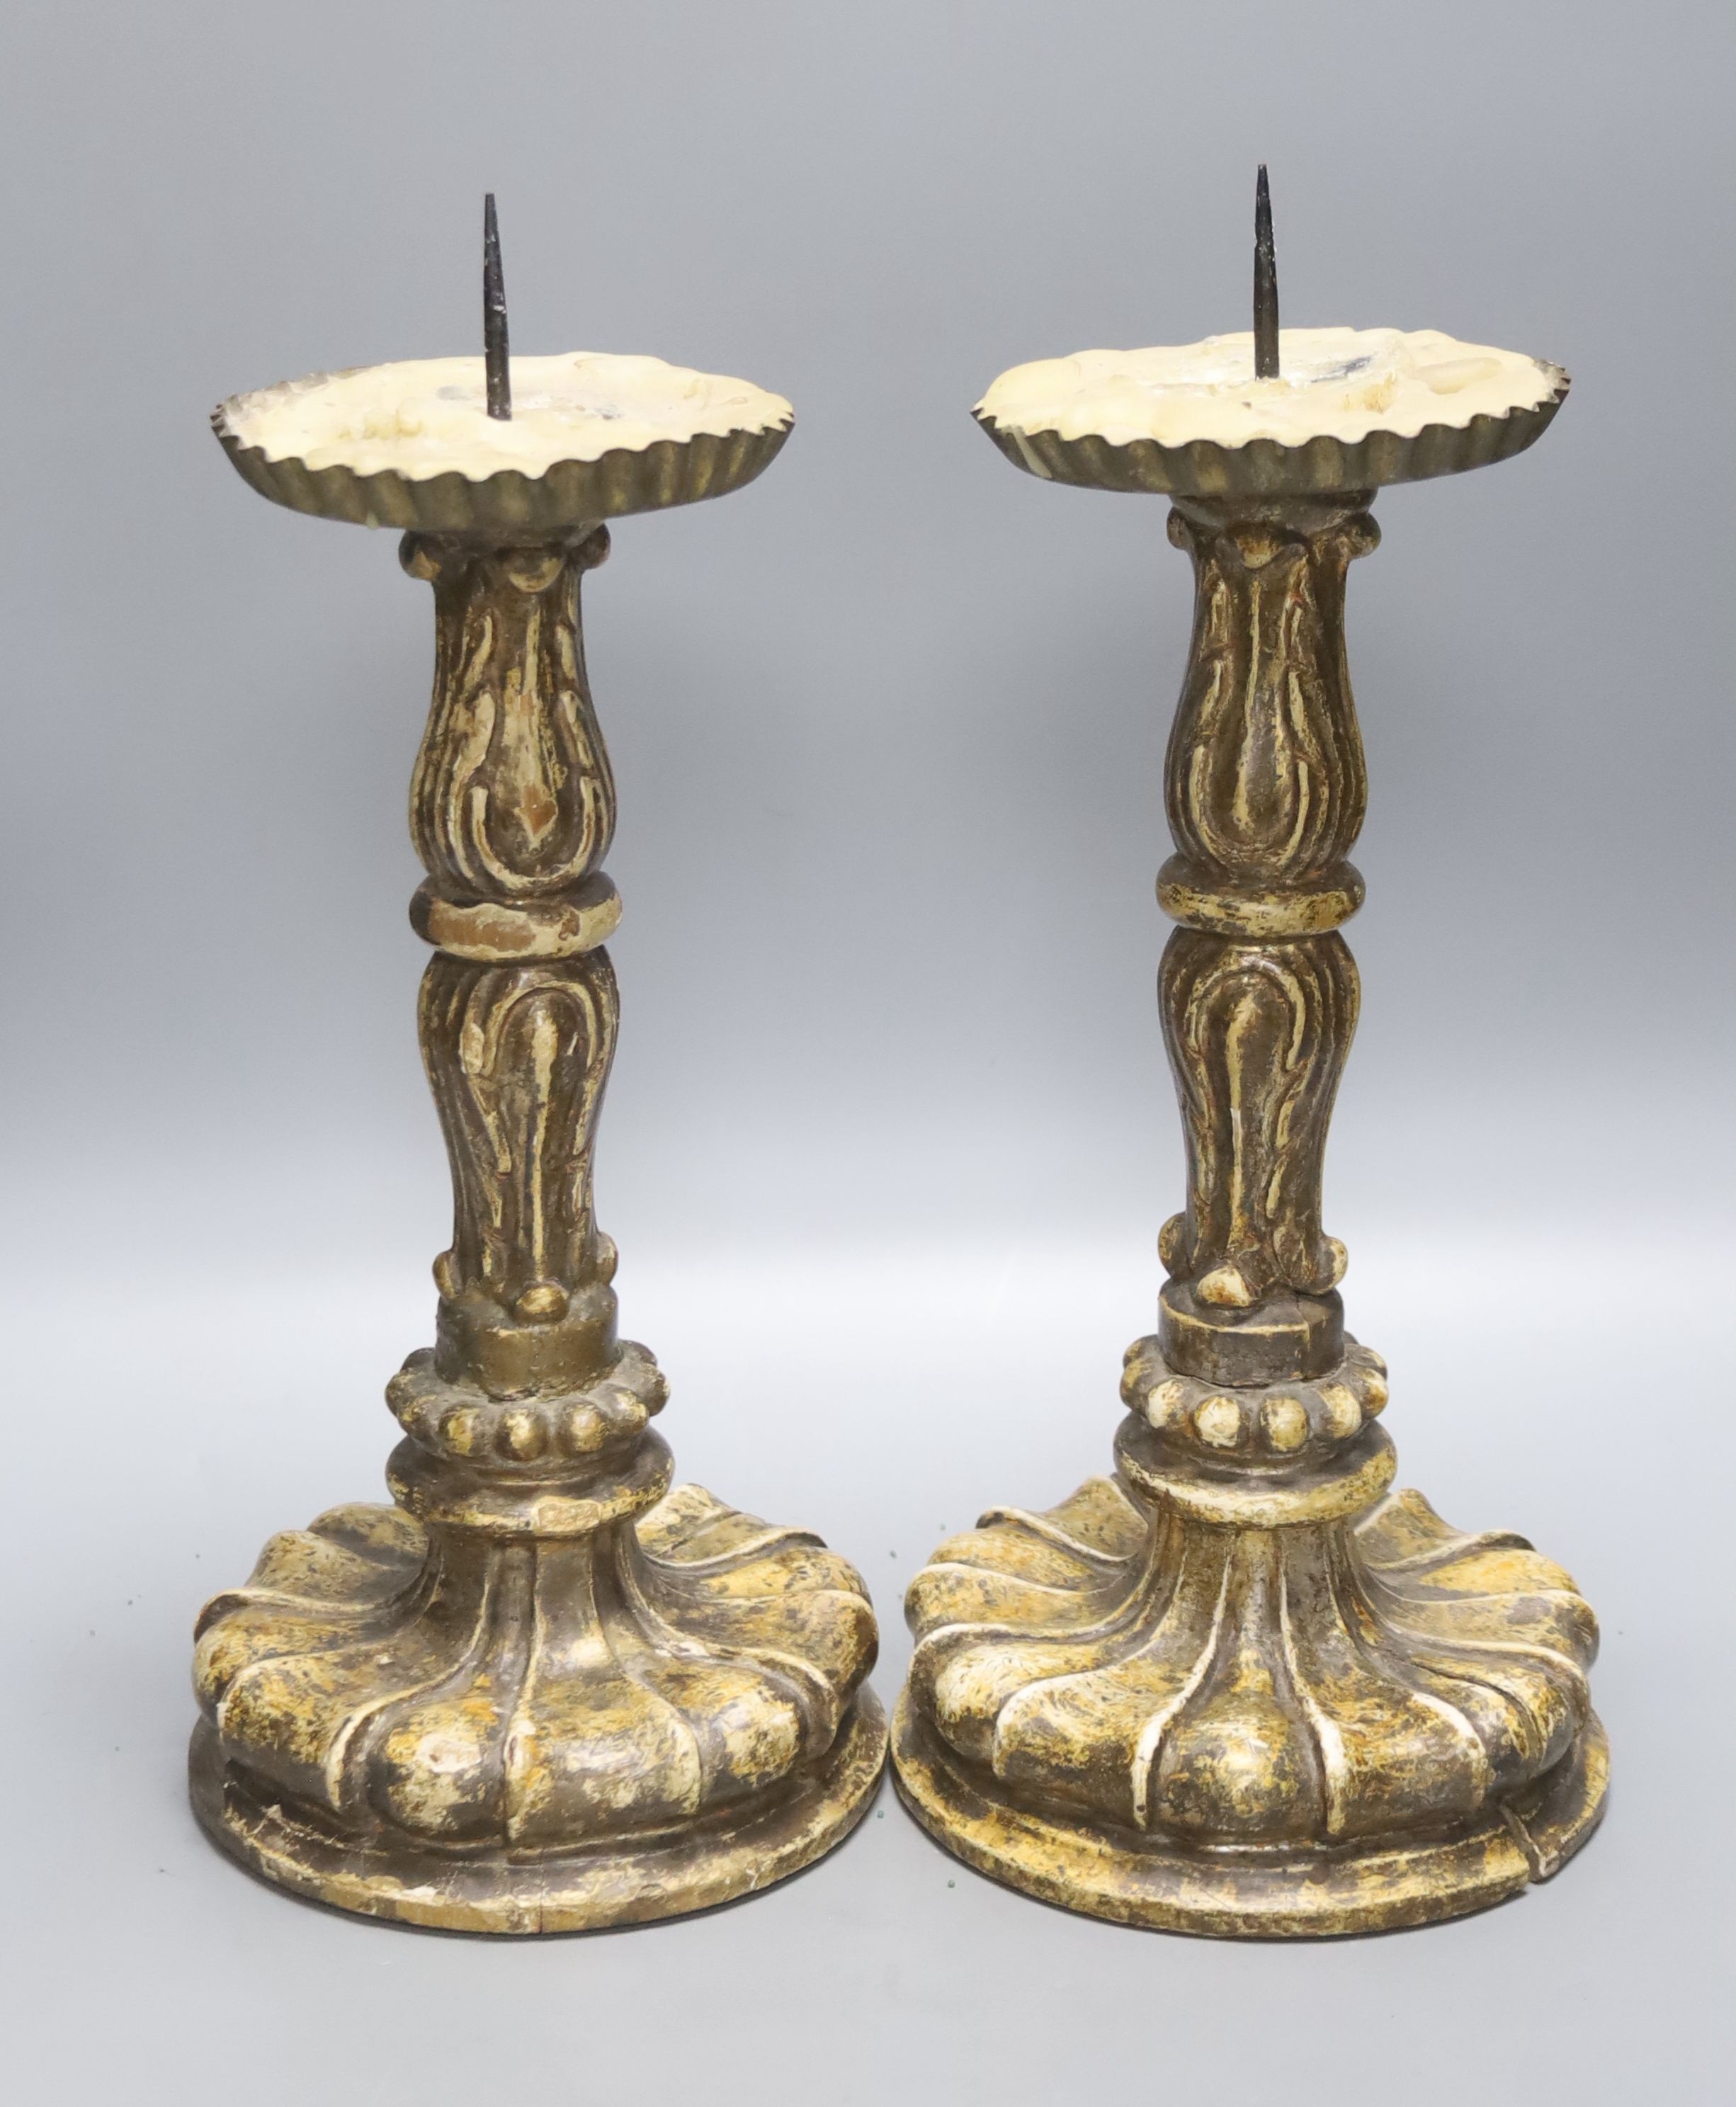 A pair of giltwood and gesso pricier candlesticks in the 17th century Italian style, height 29cm